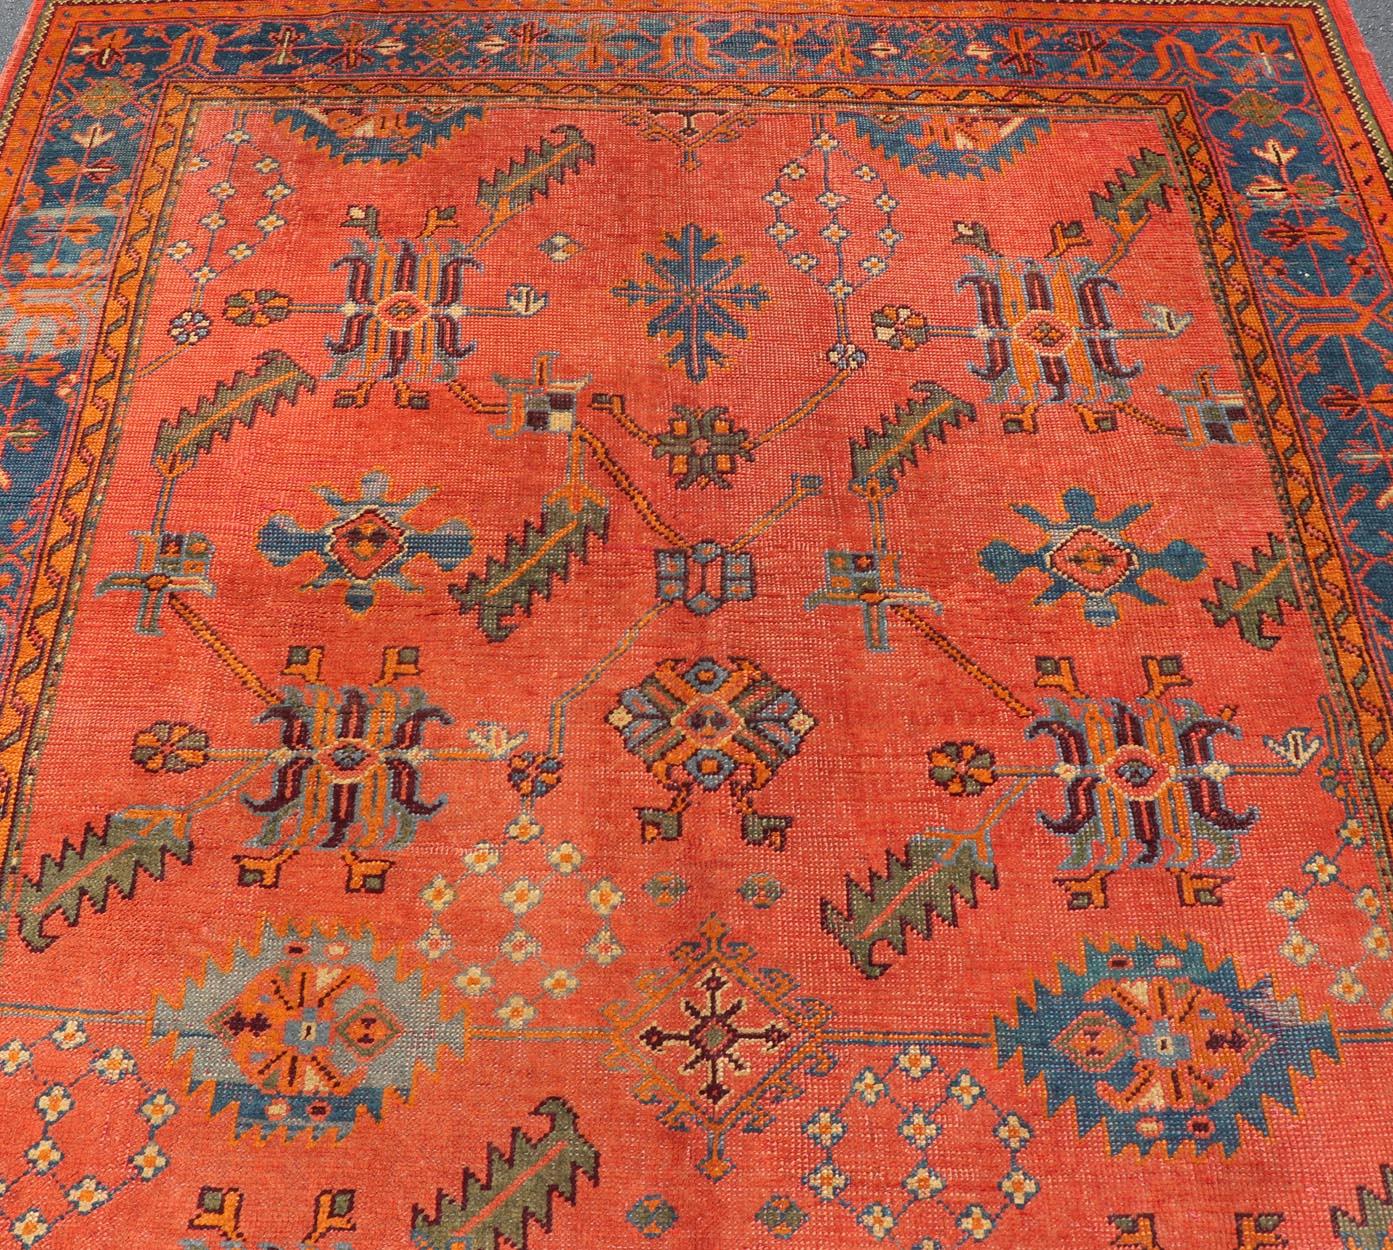 Antique Turkish Oushak Colorful Rug With All-Over Design In Salmon and Blue's  For Sale 3